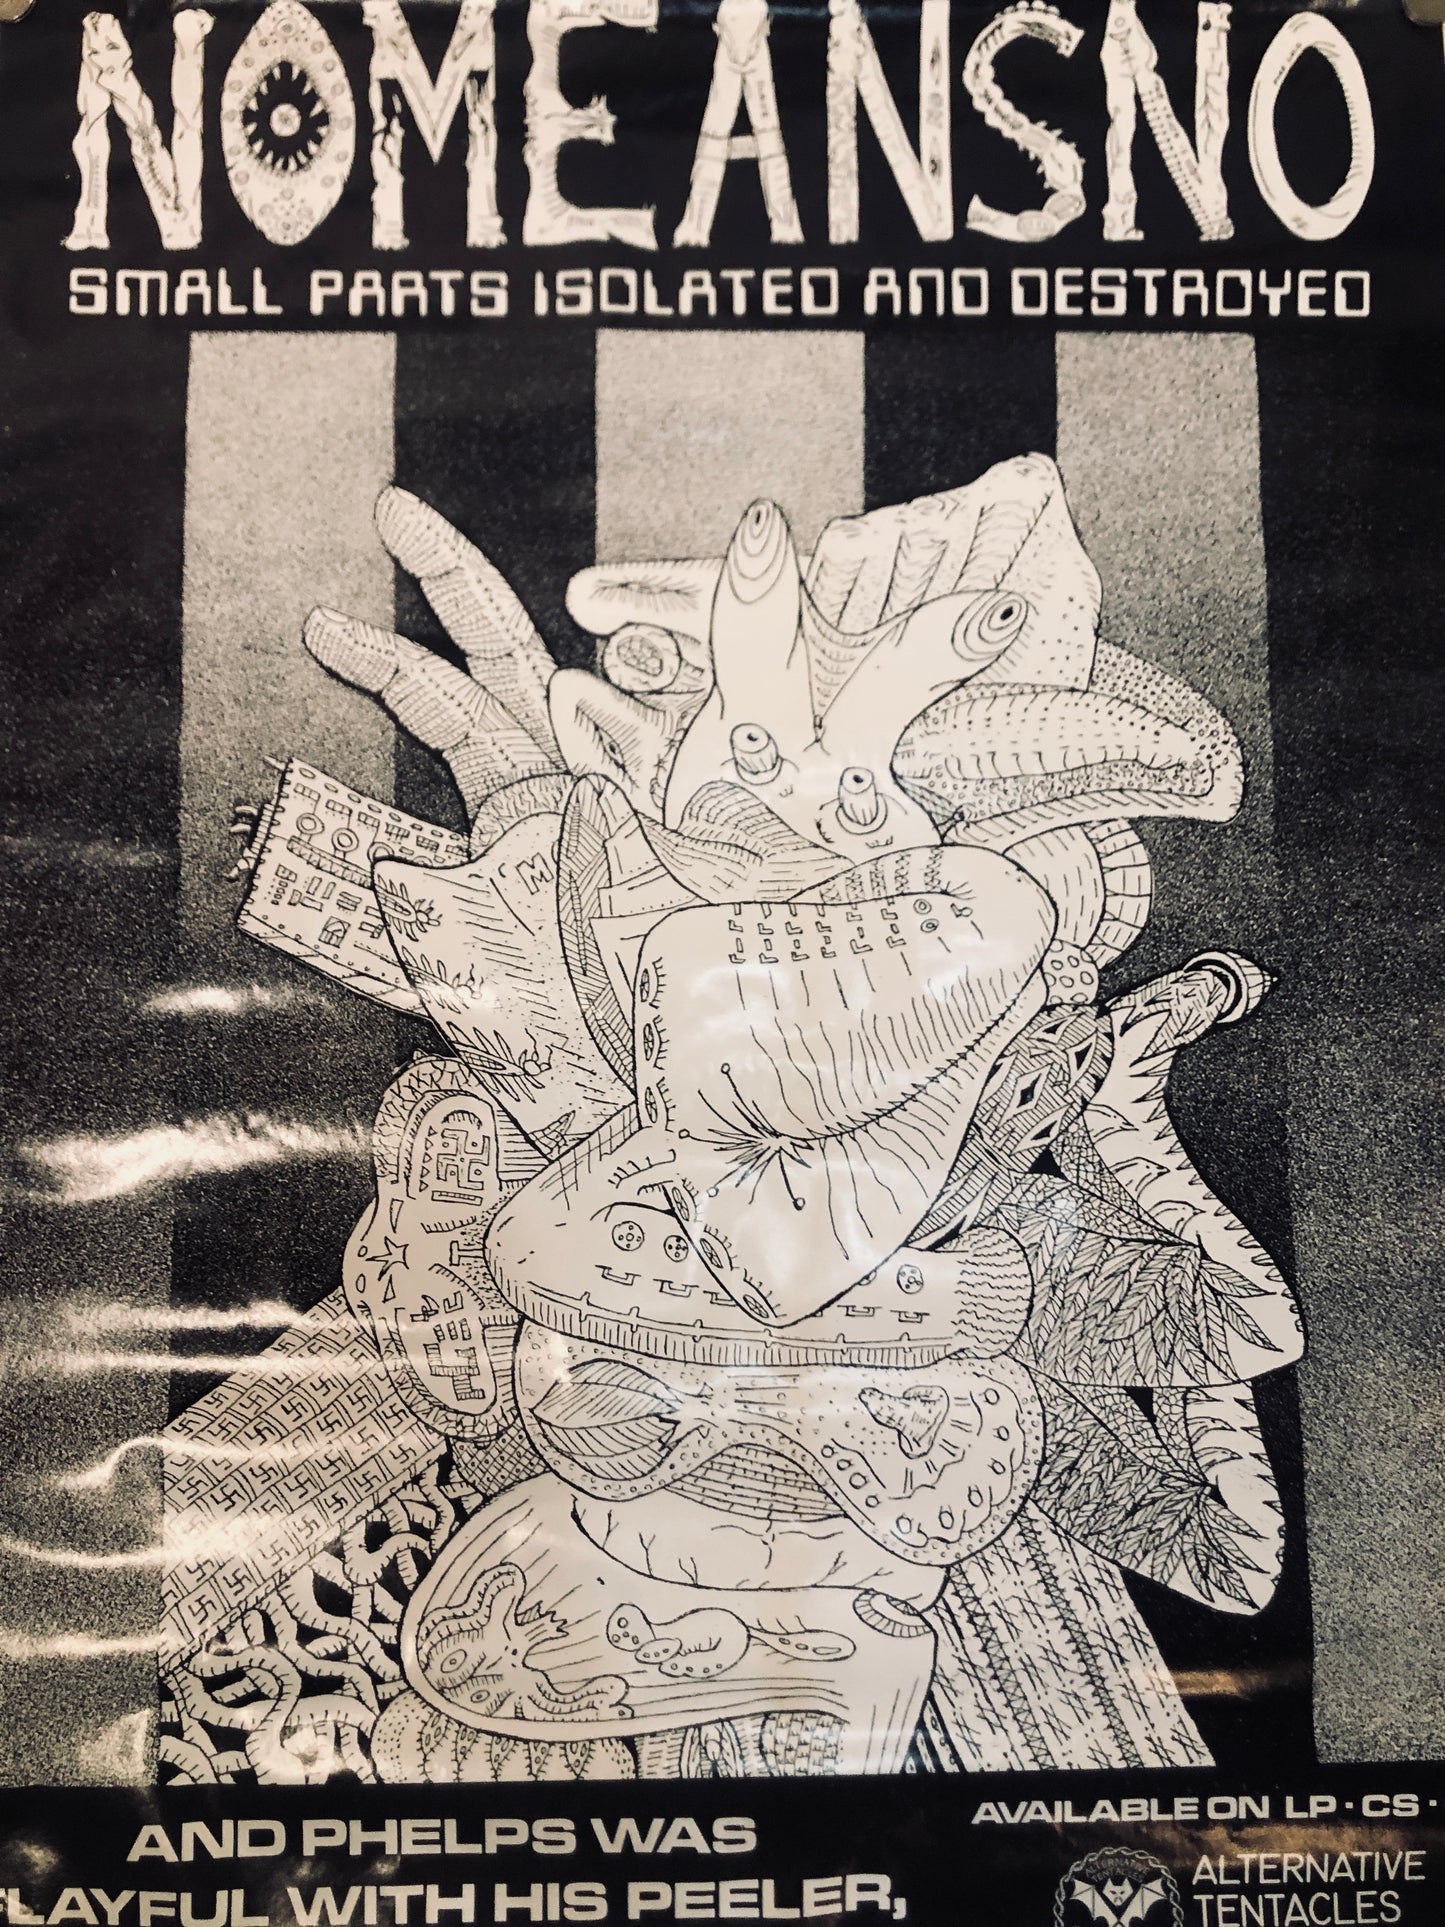 "NoMeansNo - Small Parts Isolated and Destroyed" Vintage Poster (1988)